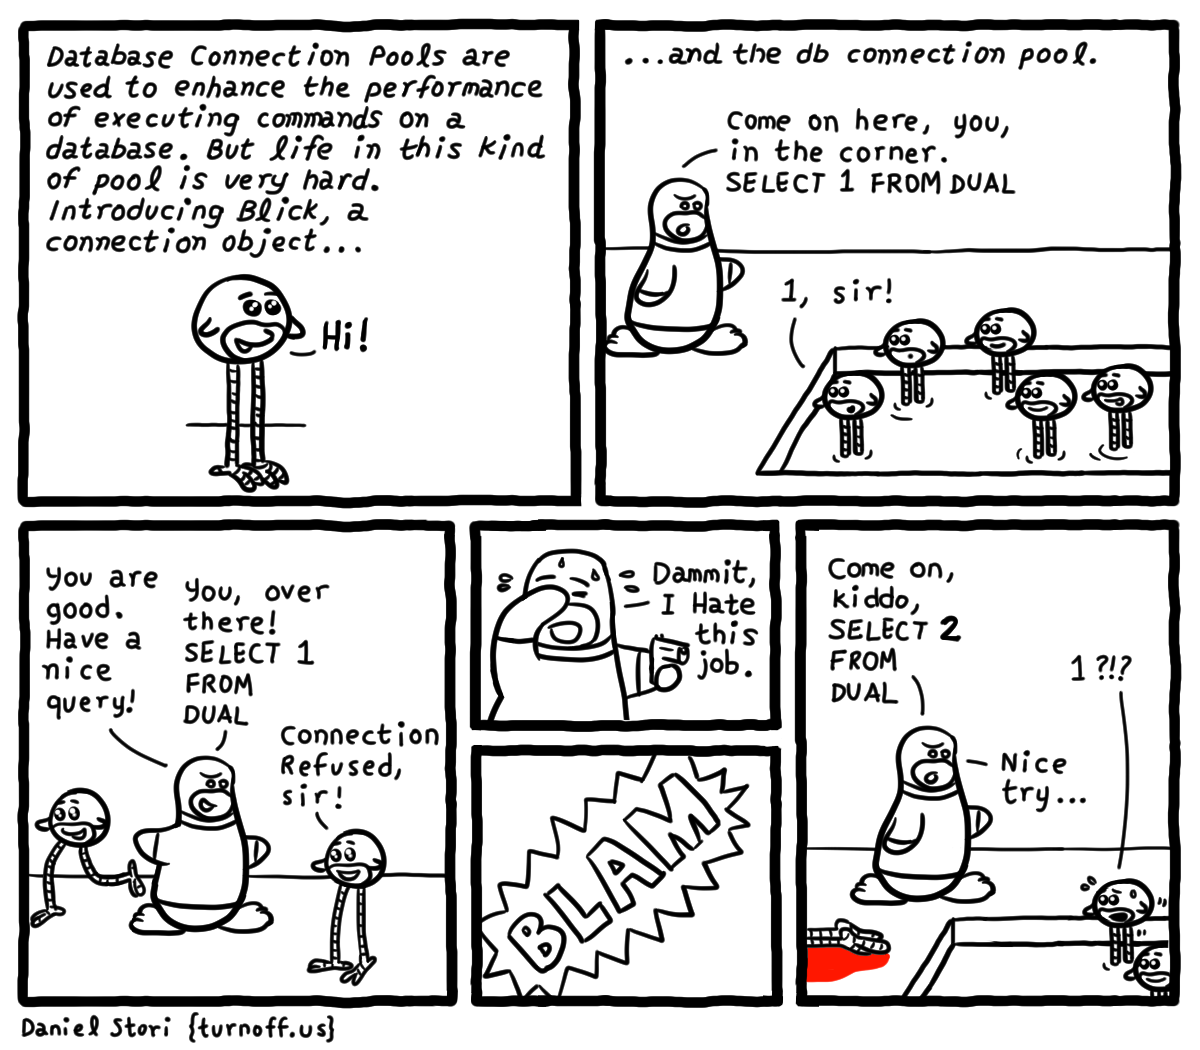 life (and death) in the db connection pool geek comic